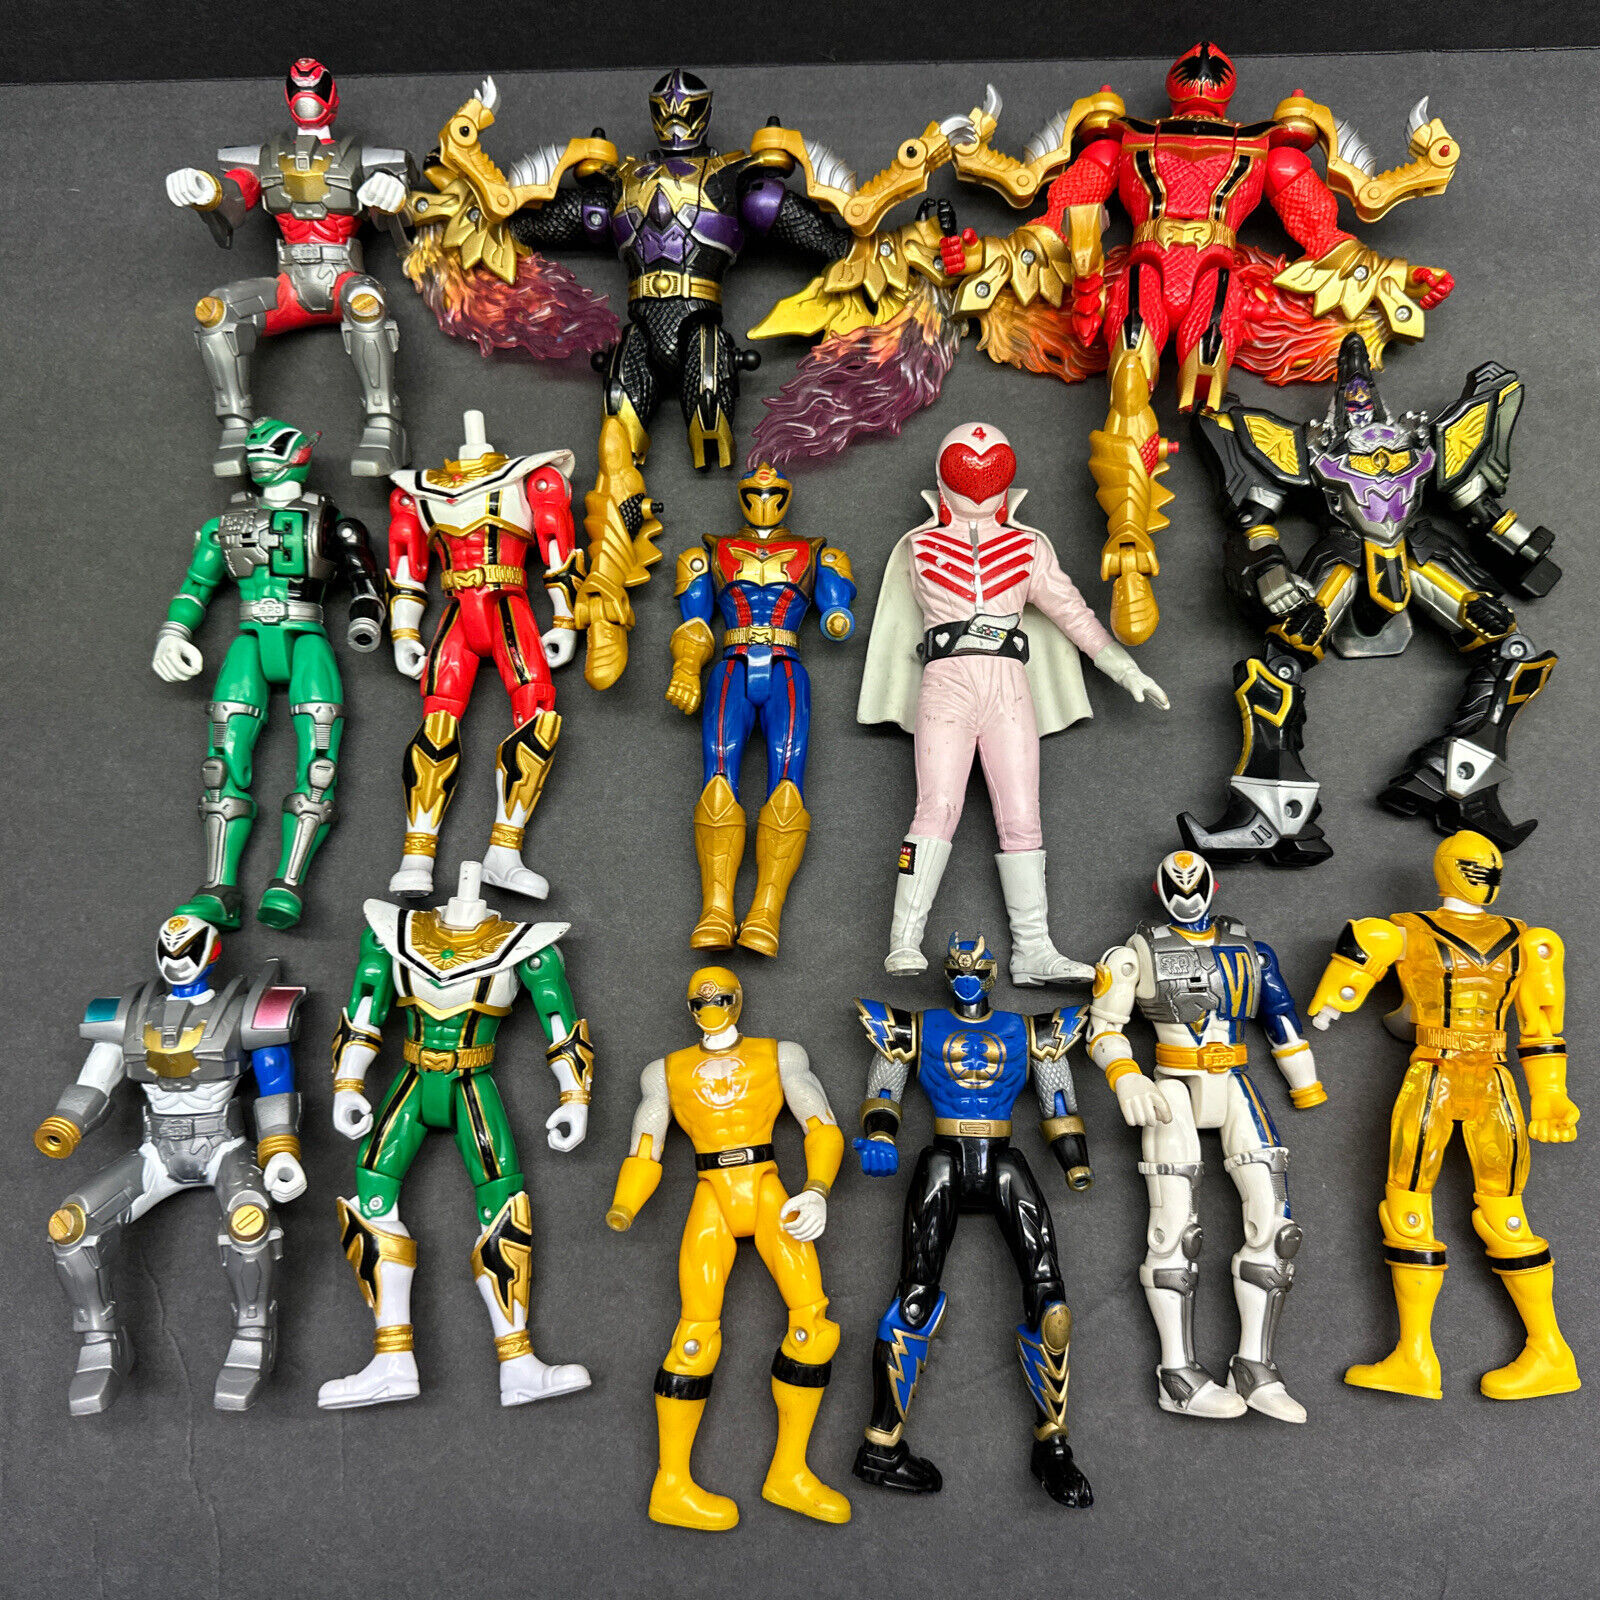 Bandai Power Rangers 5 1/2” Figures 1995 Lot of 14 Action Figures For Parts